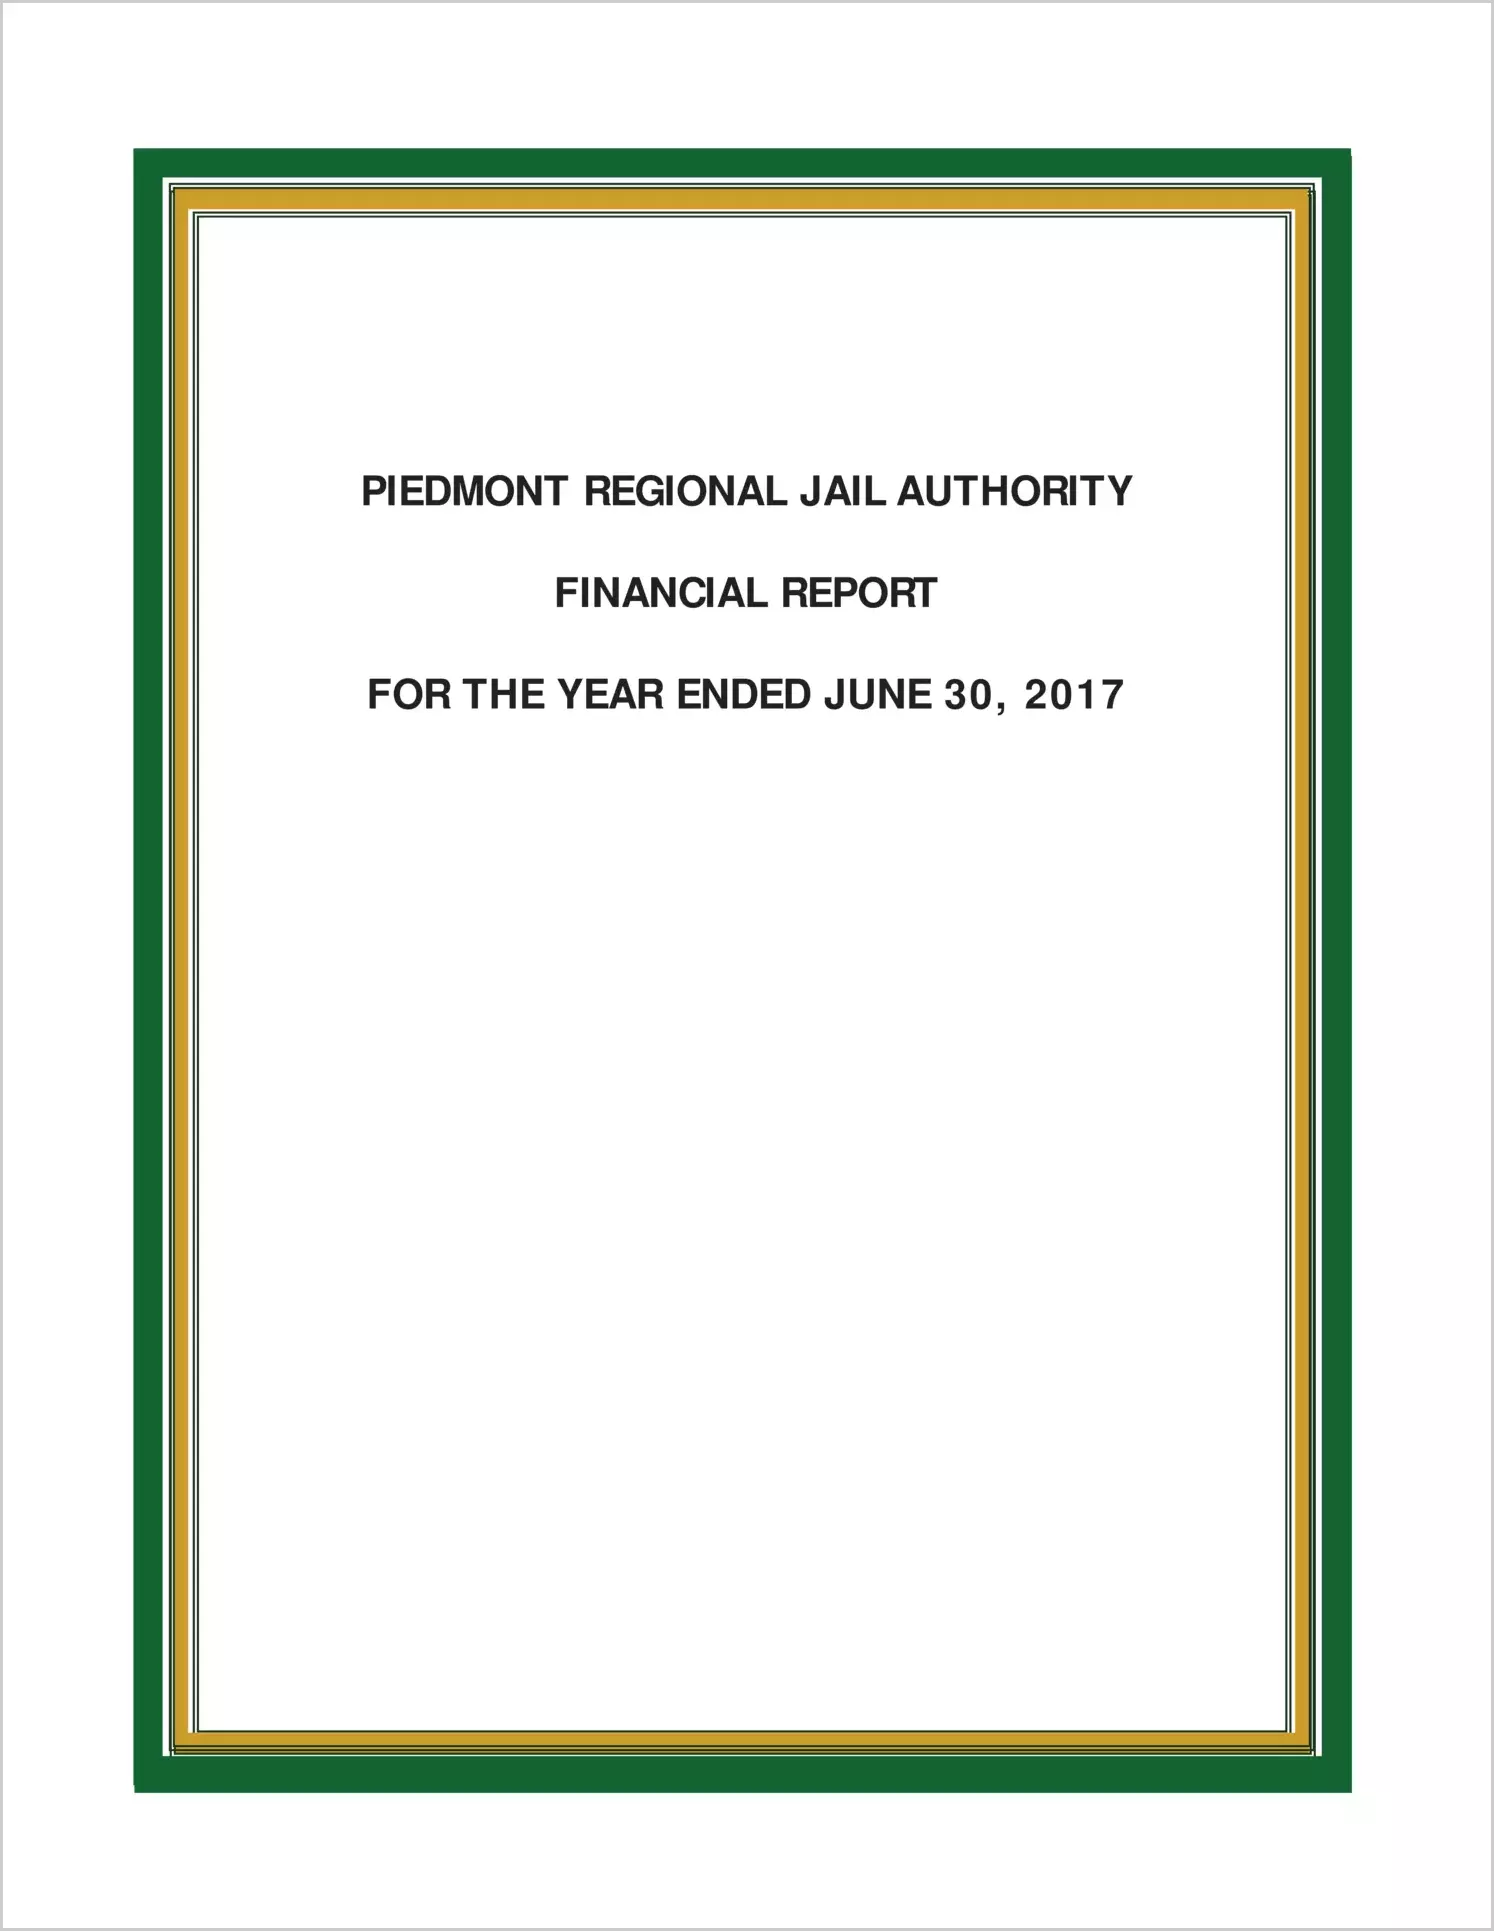 2017 ABC/Other Annual Financial Report  for Piedmont Regional Jail Authority